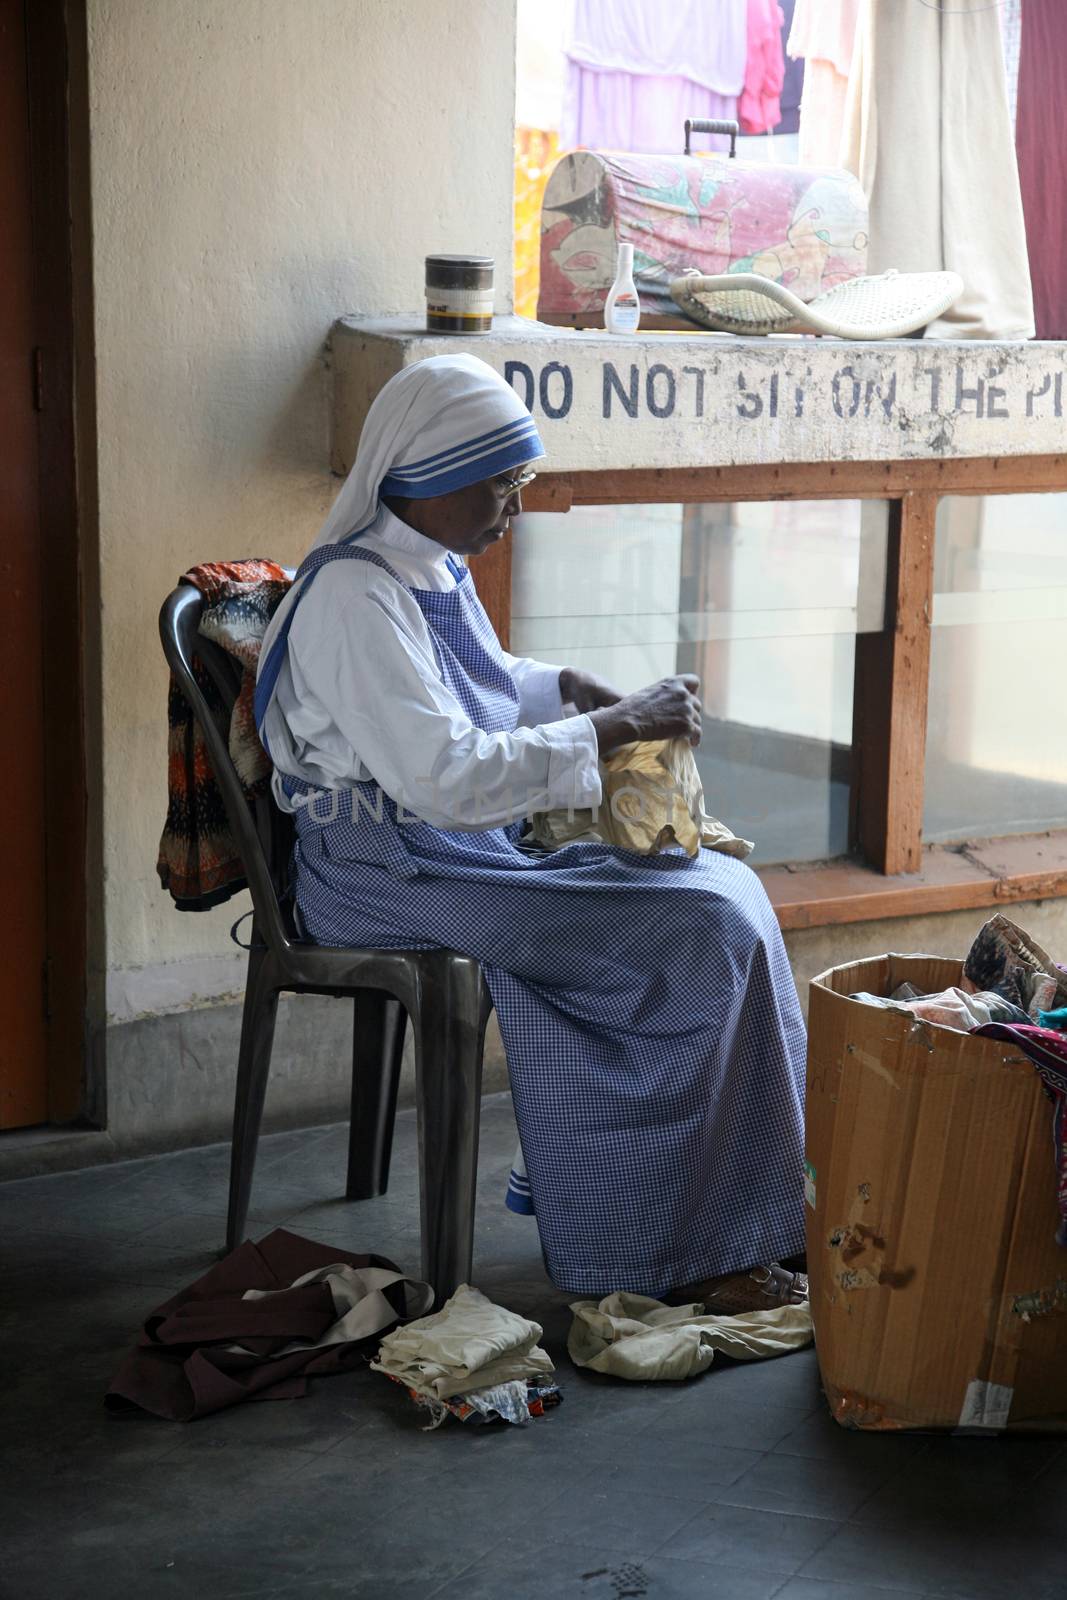 Sister of Missionaries of Charity classified the goods they have received from charitable organizations in Kolkata, India on January 24, 2009.